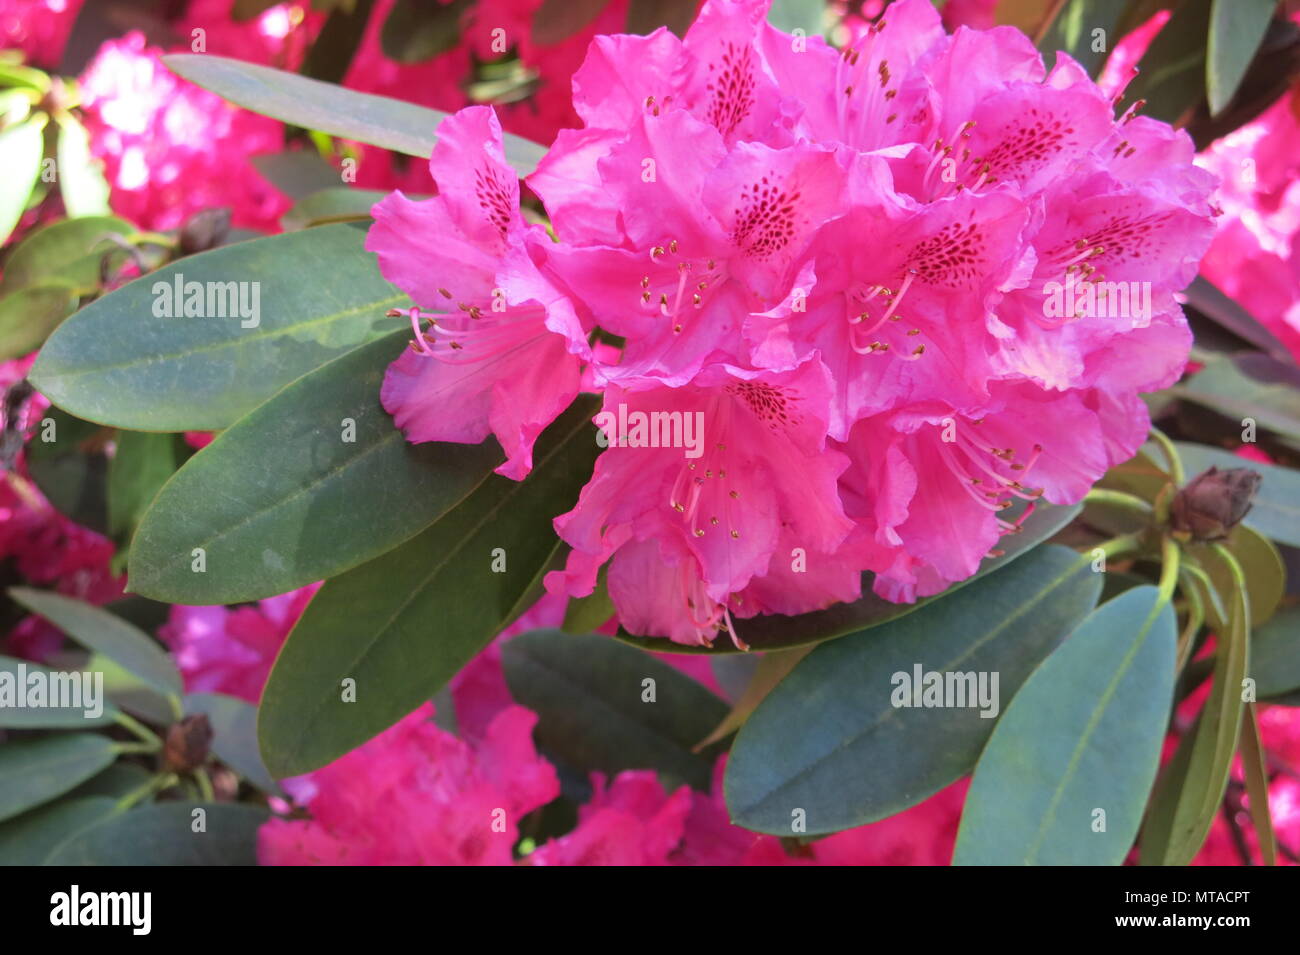 Close-up of the deep pink rhododendron shrubs in full flower at Ightham Mote, the National Trust moated manor house near Sevenoaks, Kent Stock Photo